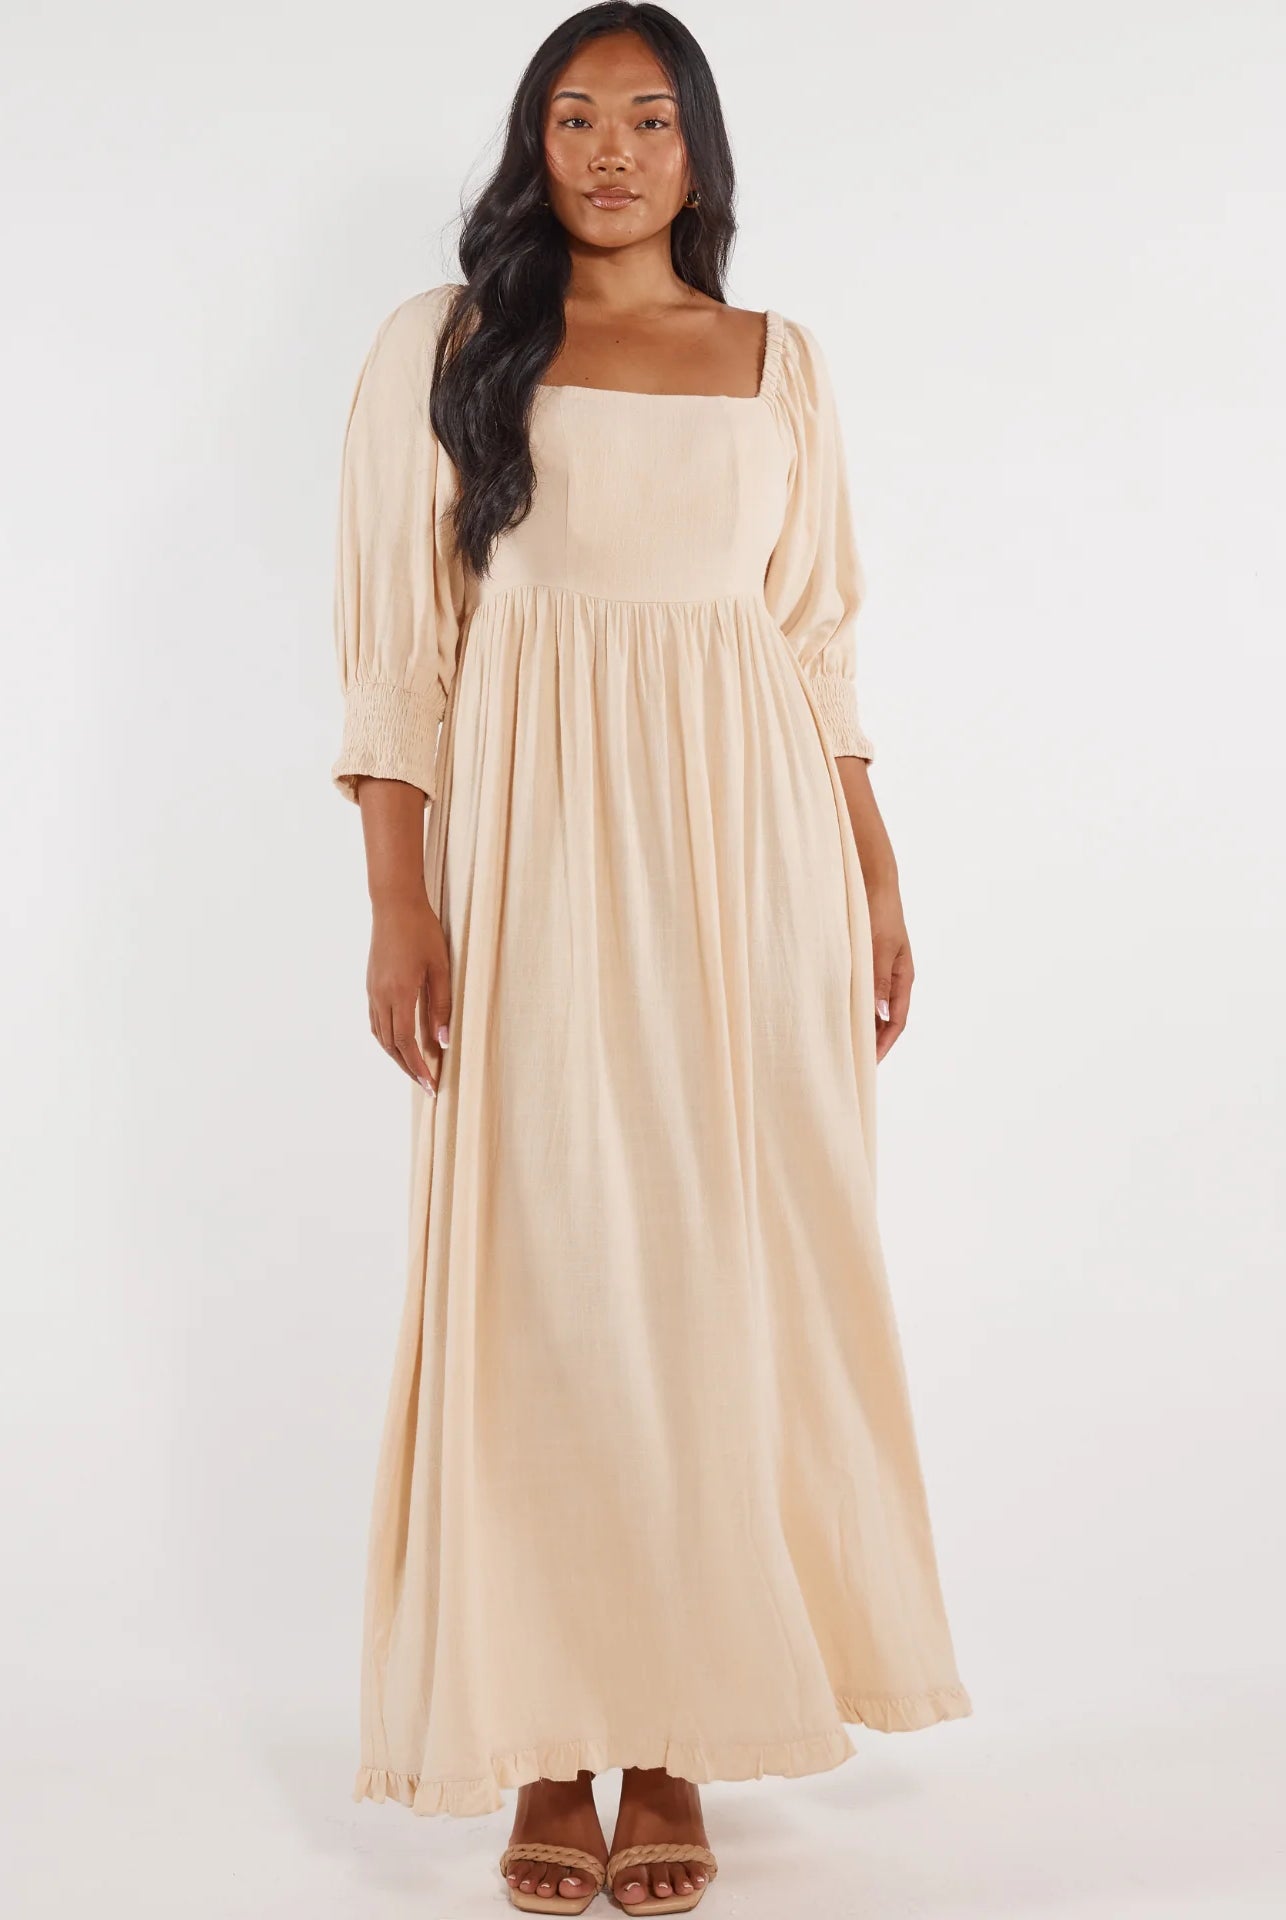 Sand Maxi Dress from Girl and the sun in breathable fabric